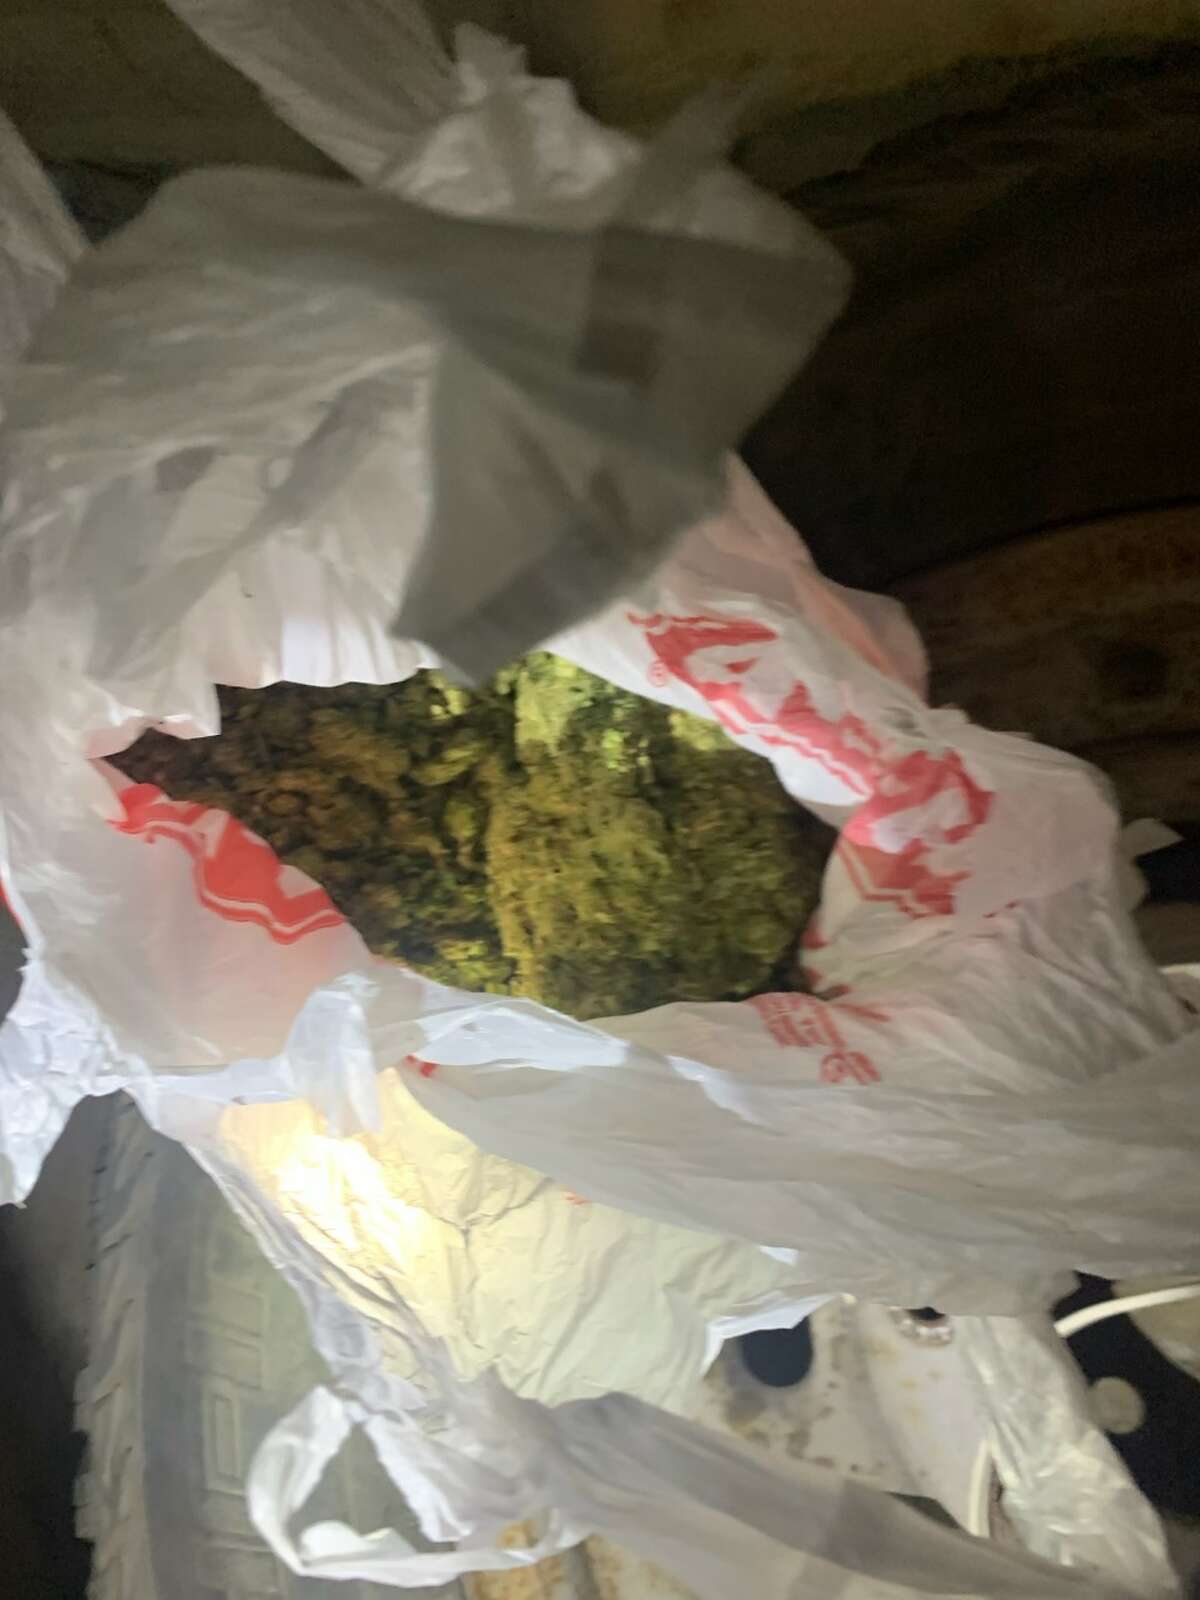 Texas DPS and the U.S. Border Patrol found this small amount of marijuana along with 11 migrants inside a south Laredo stash house on March 20.